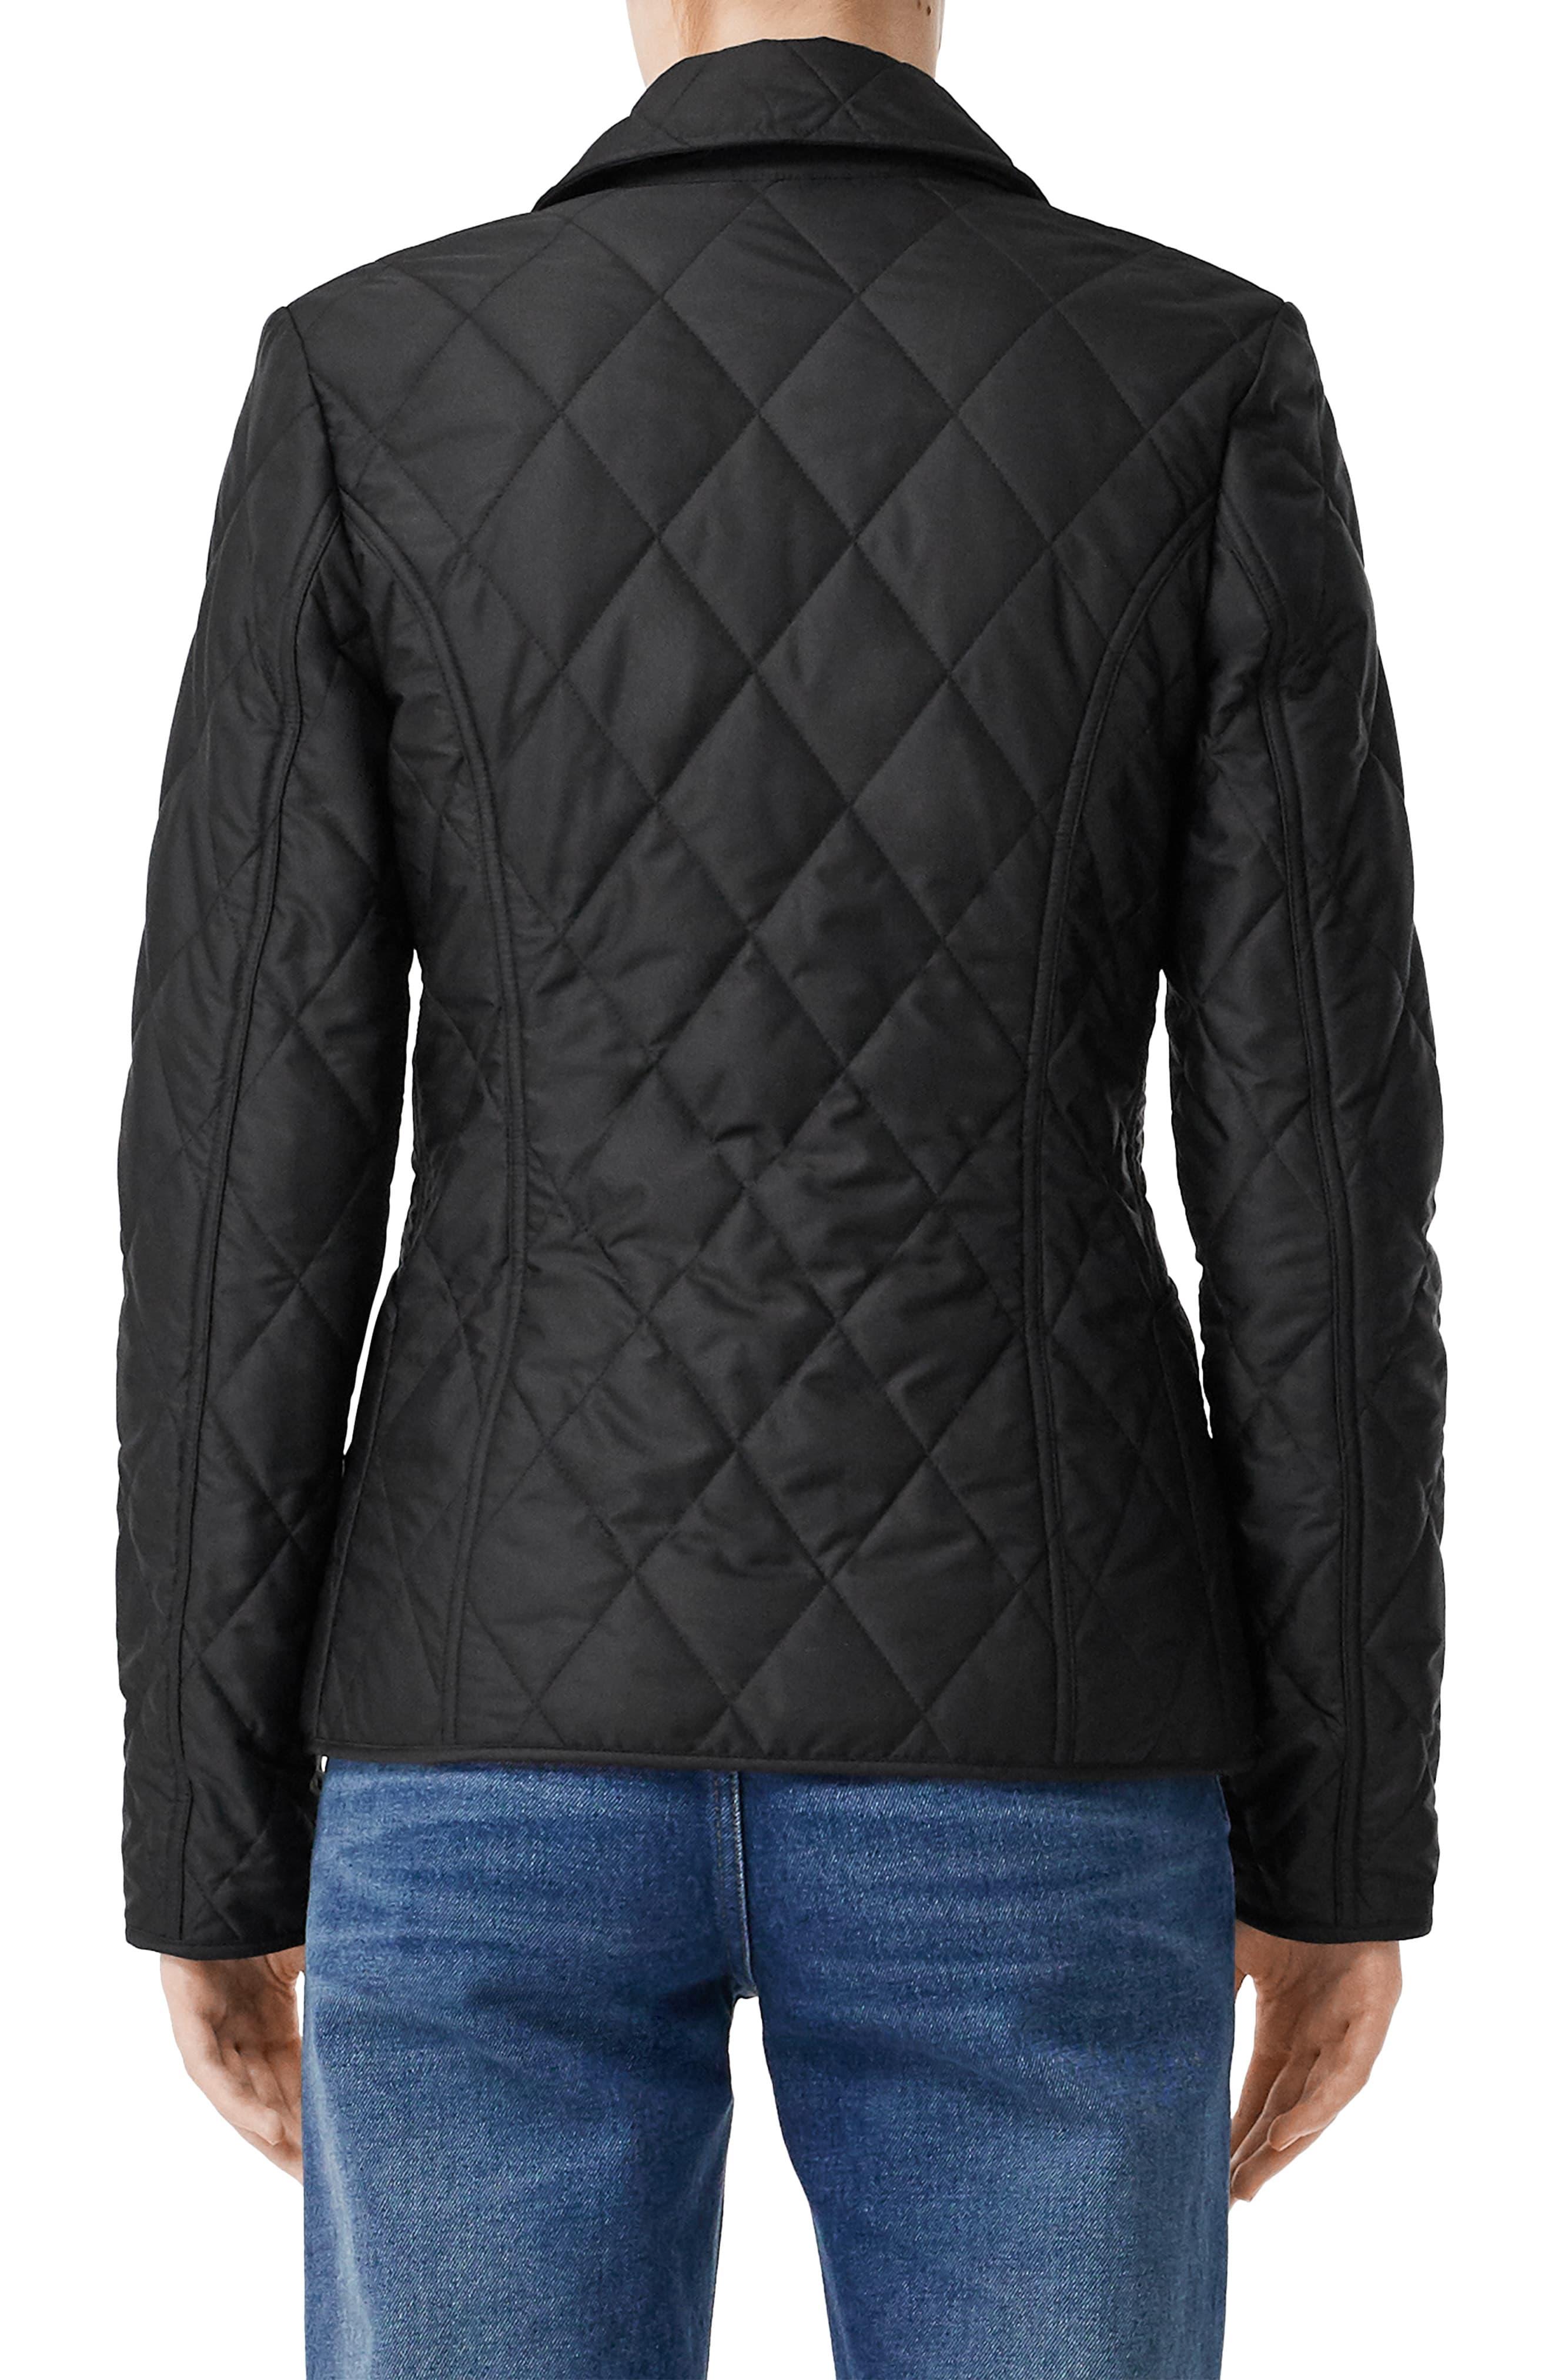 Burberry Synthetic Fernleigh Quilted Jacket in Black - Lyst